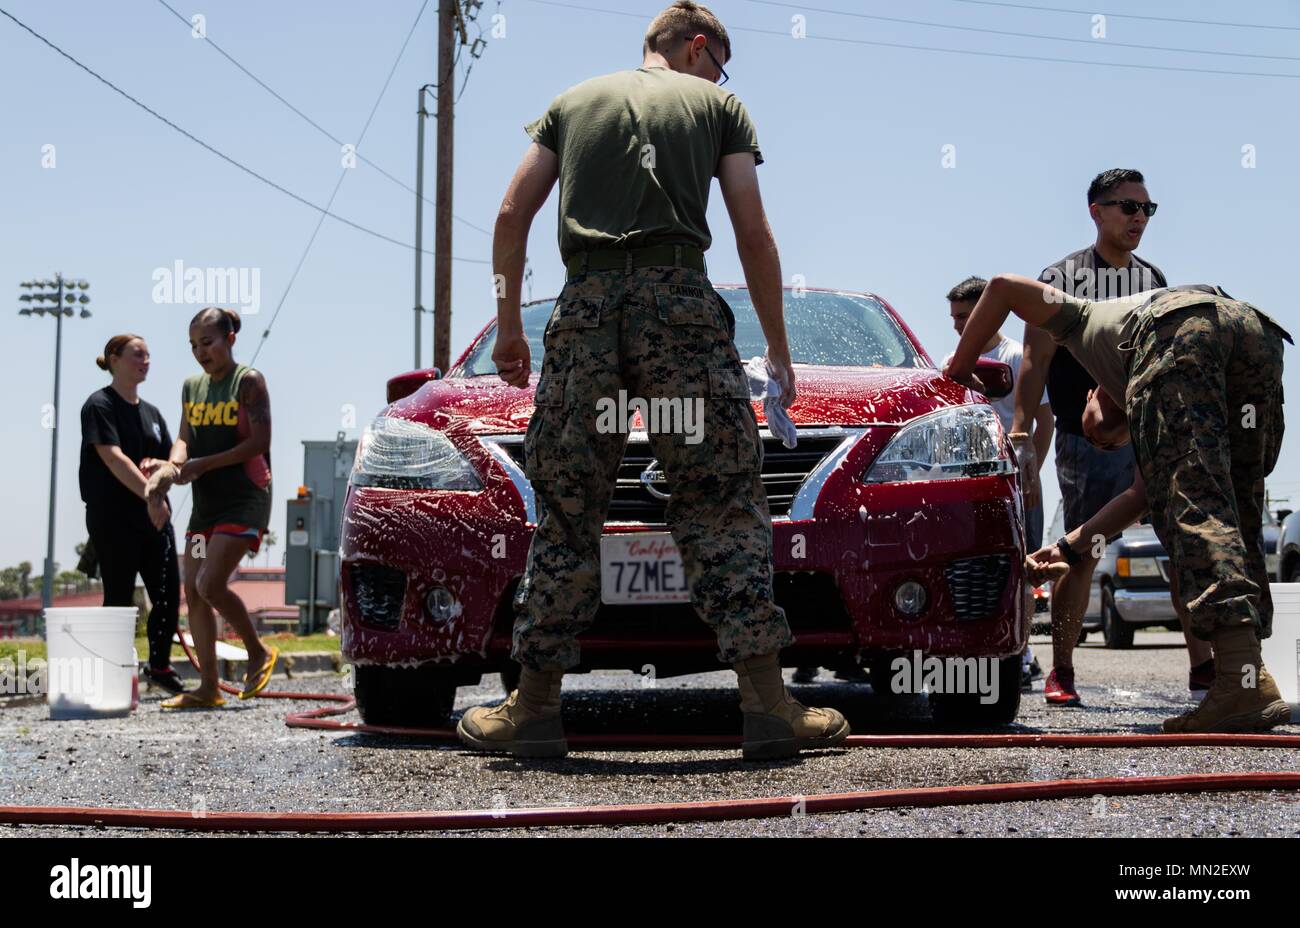 U.S. Marines with Combat Logistics Battalion 1, Combat Logistics Regiment 1, 1st Marine Logistics Group, work to detail a car during a fundraising car wash on Marine Corps Base Camp Pendleton, Calif. May 10, 2018, May 11, 2018. Funds from the car wash will be allocated towards the unit's Marine Corps ball, held annually on or around November 10 to celebrate the Marine Corps' birthday. (Marine Corps photo by Cpl. Desiree King). () Stock Photo